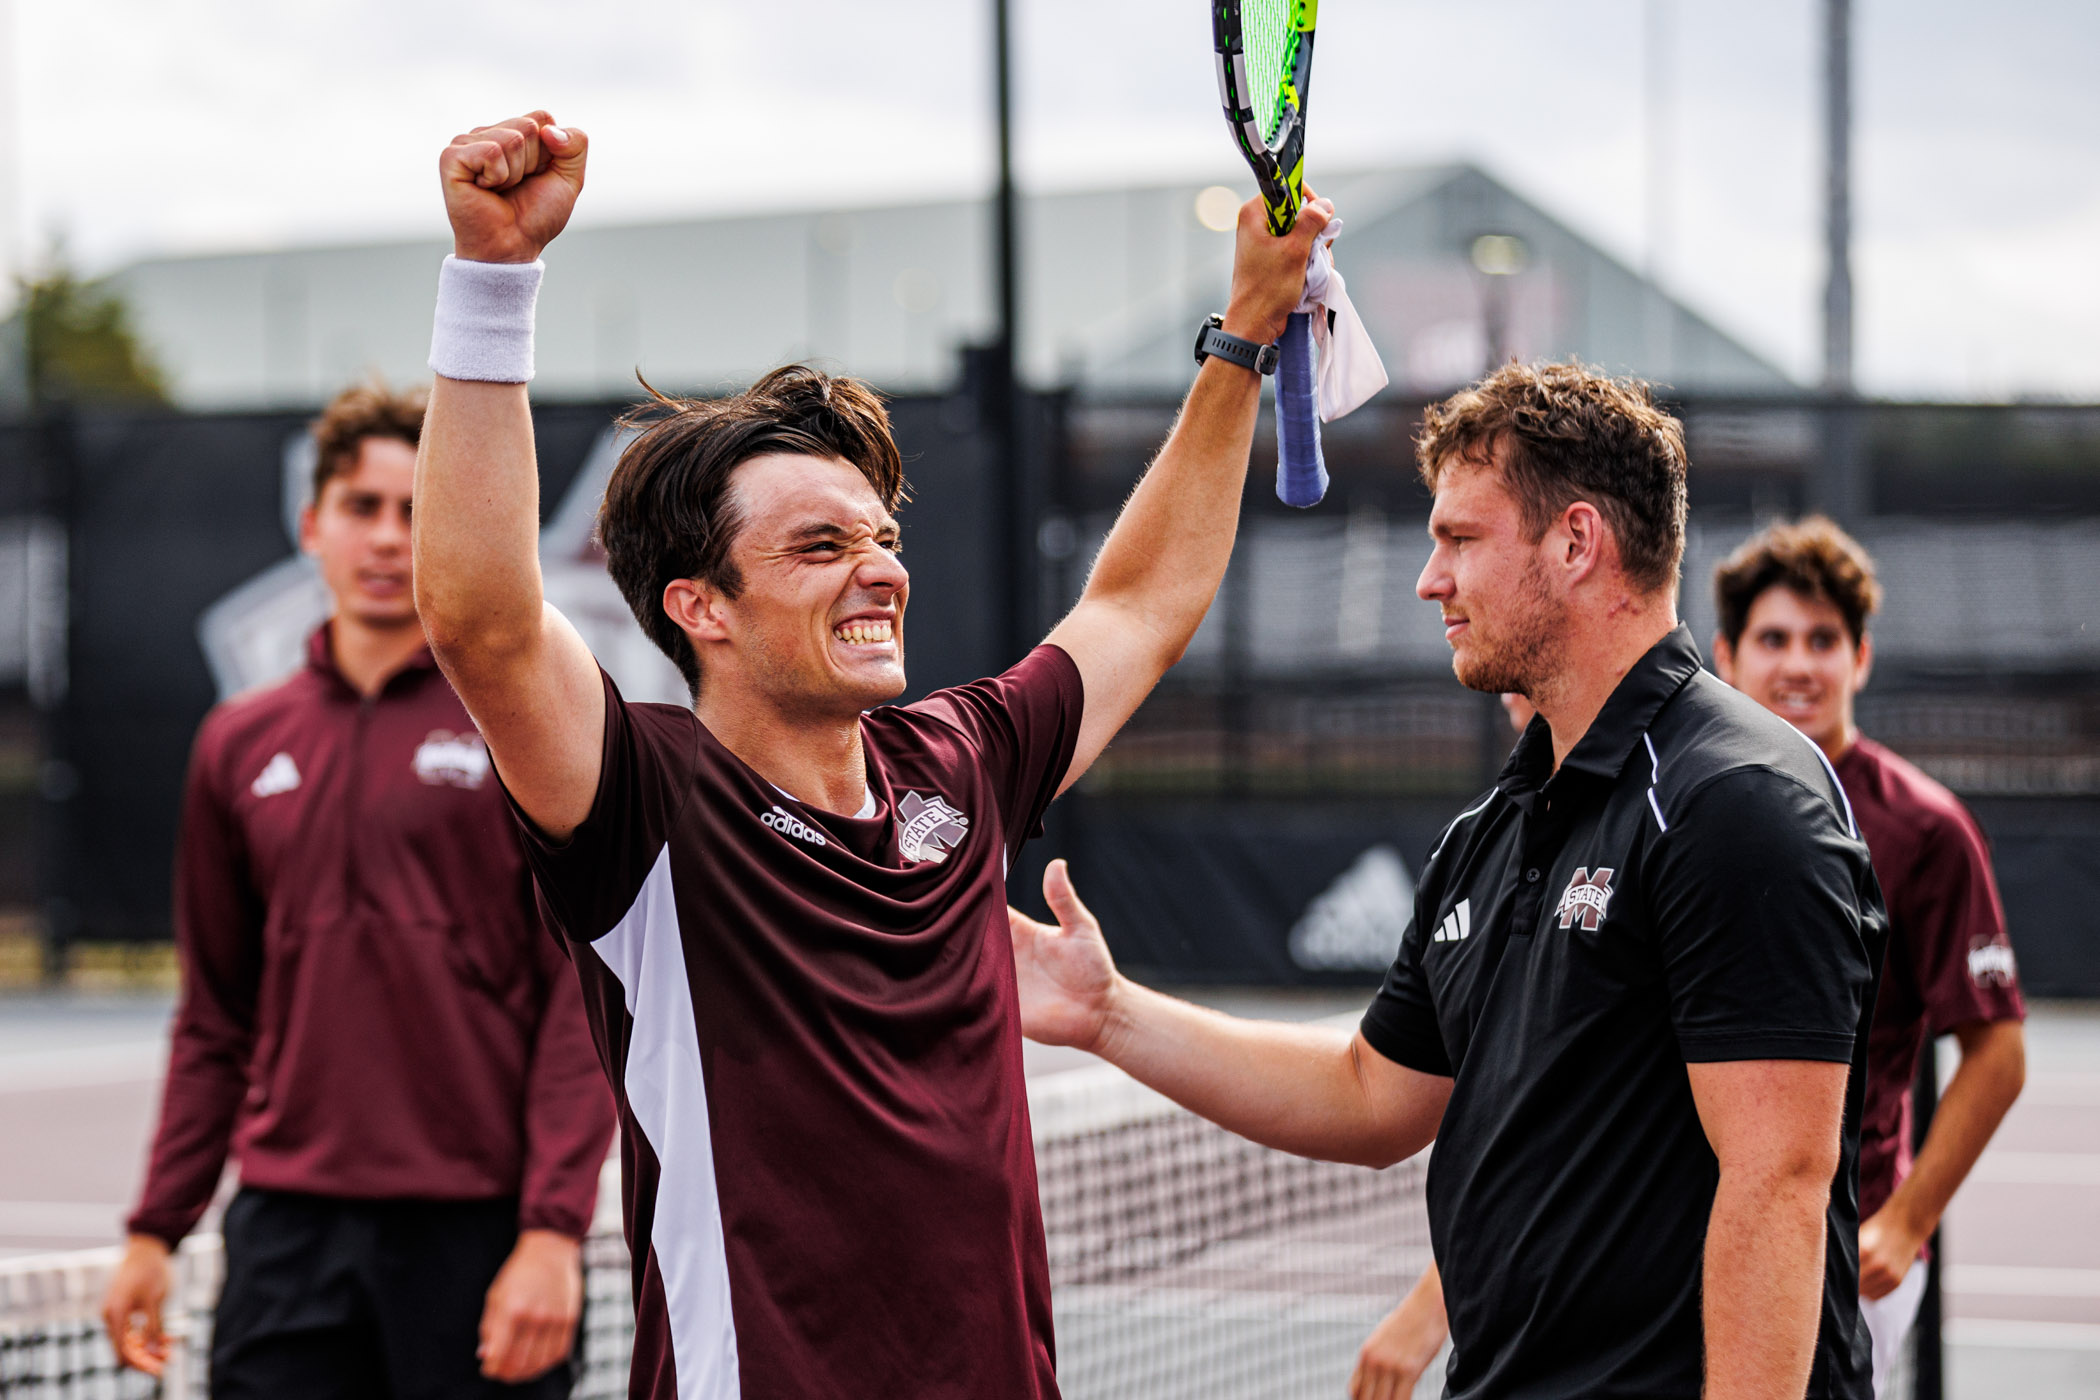 This past weekend, senior men’s tennis player Carles Hernandez celebrated his team’s eighth ranked win of the year